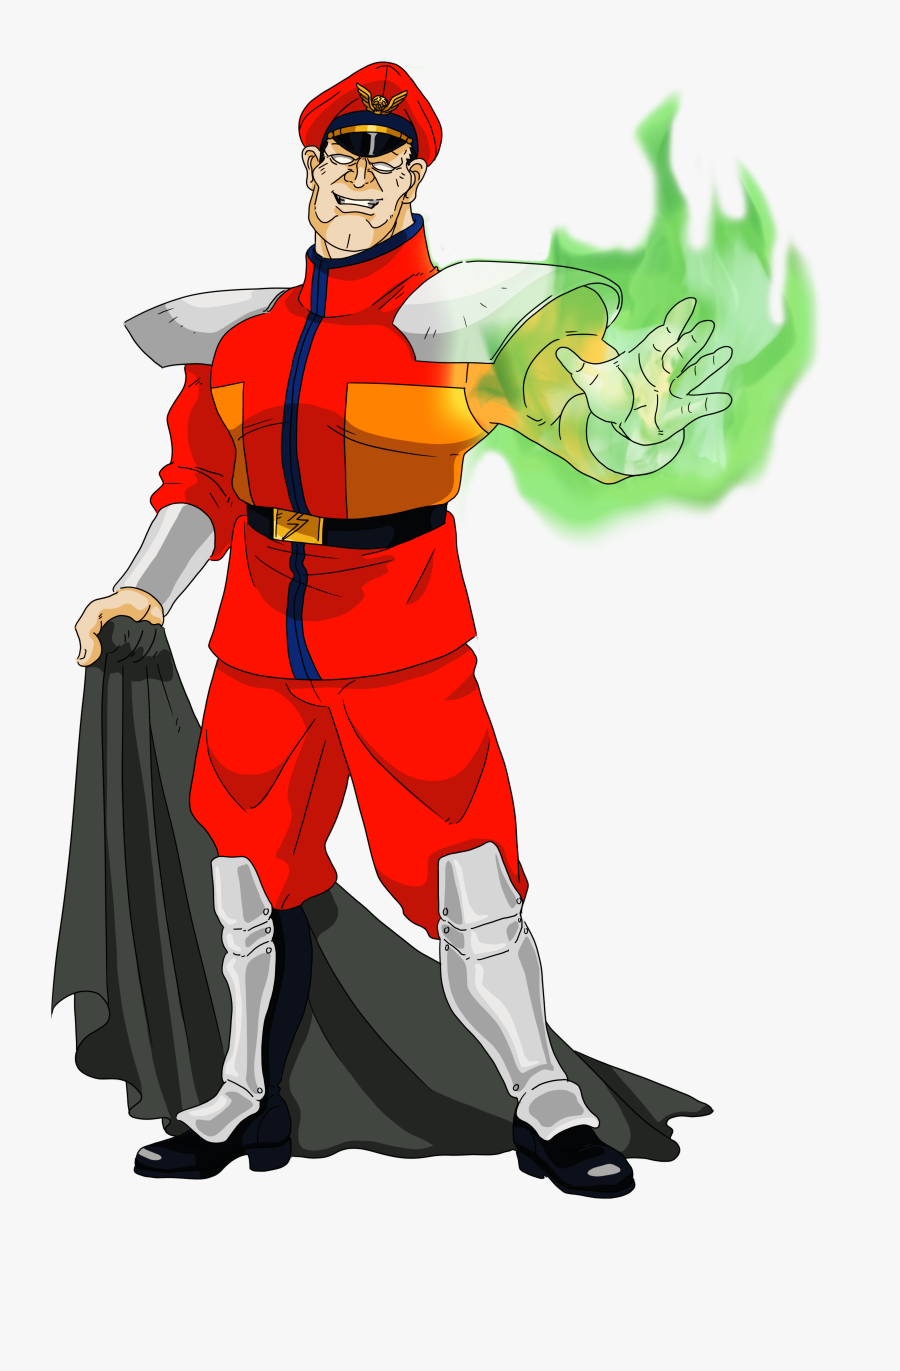 Png Free Download Best - Vega Of Street Fighters, Transparent Clipart